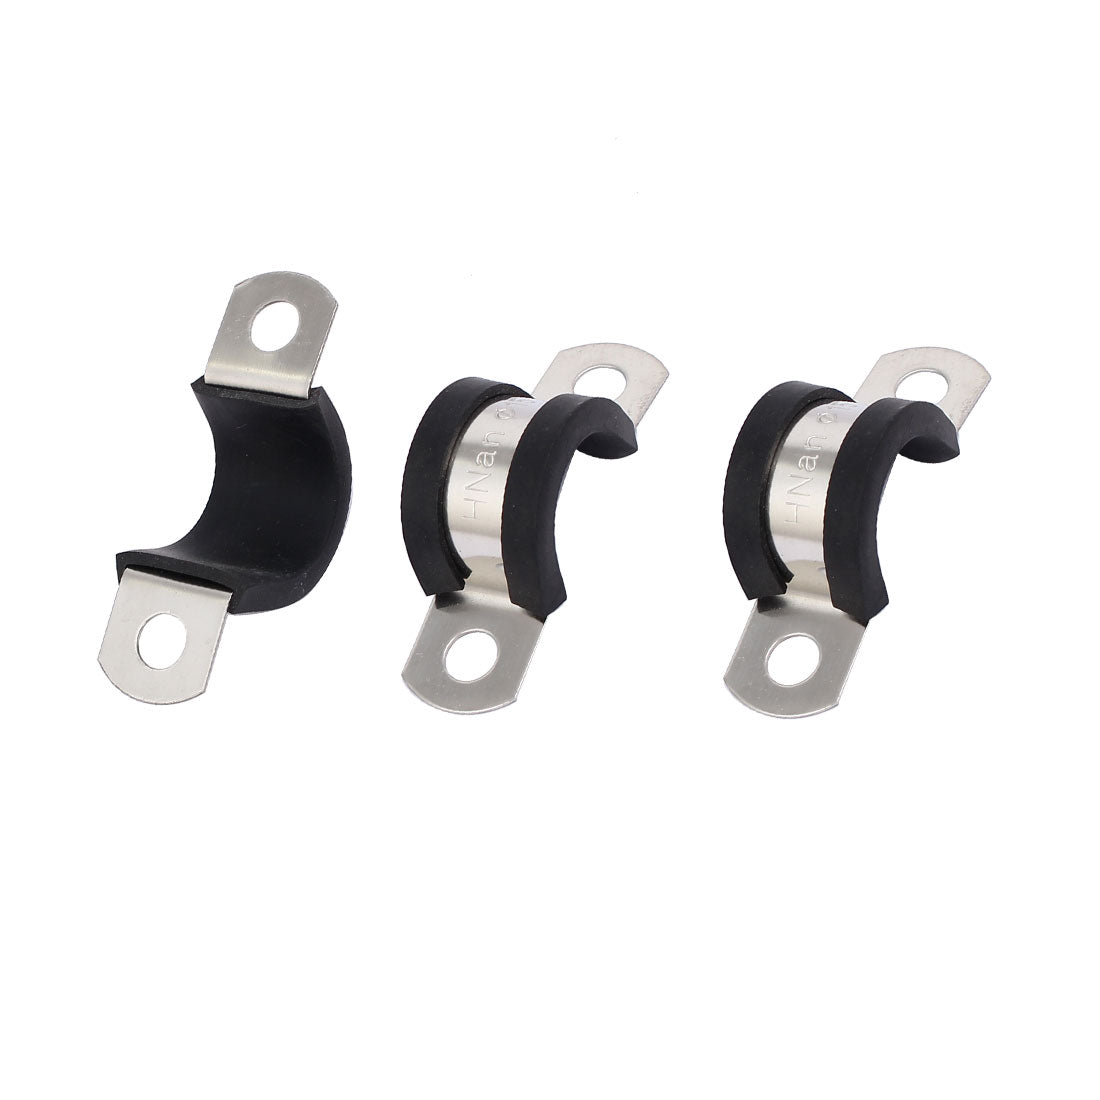 uxcell Uxcell 15mm Dia EPDM Rubber Lined U Shaped Pipe Tube Wire Clamps Clips 3pcs